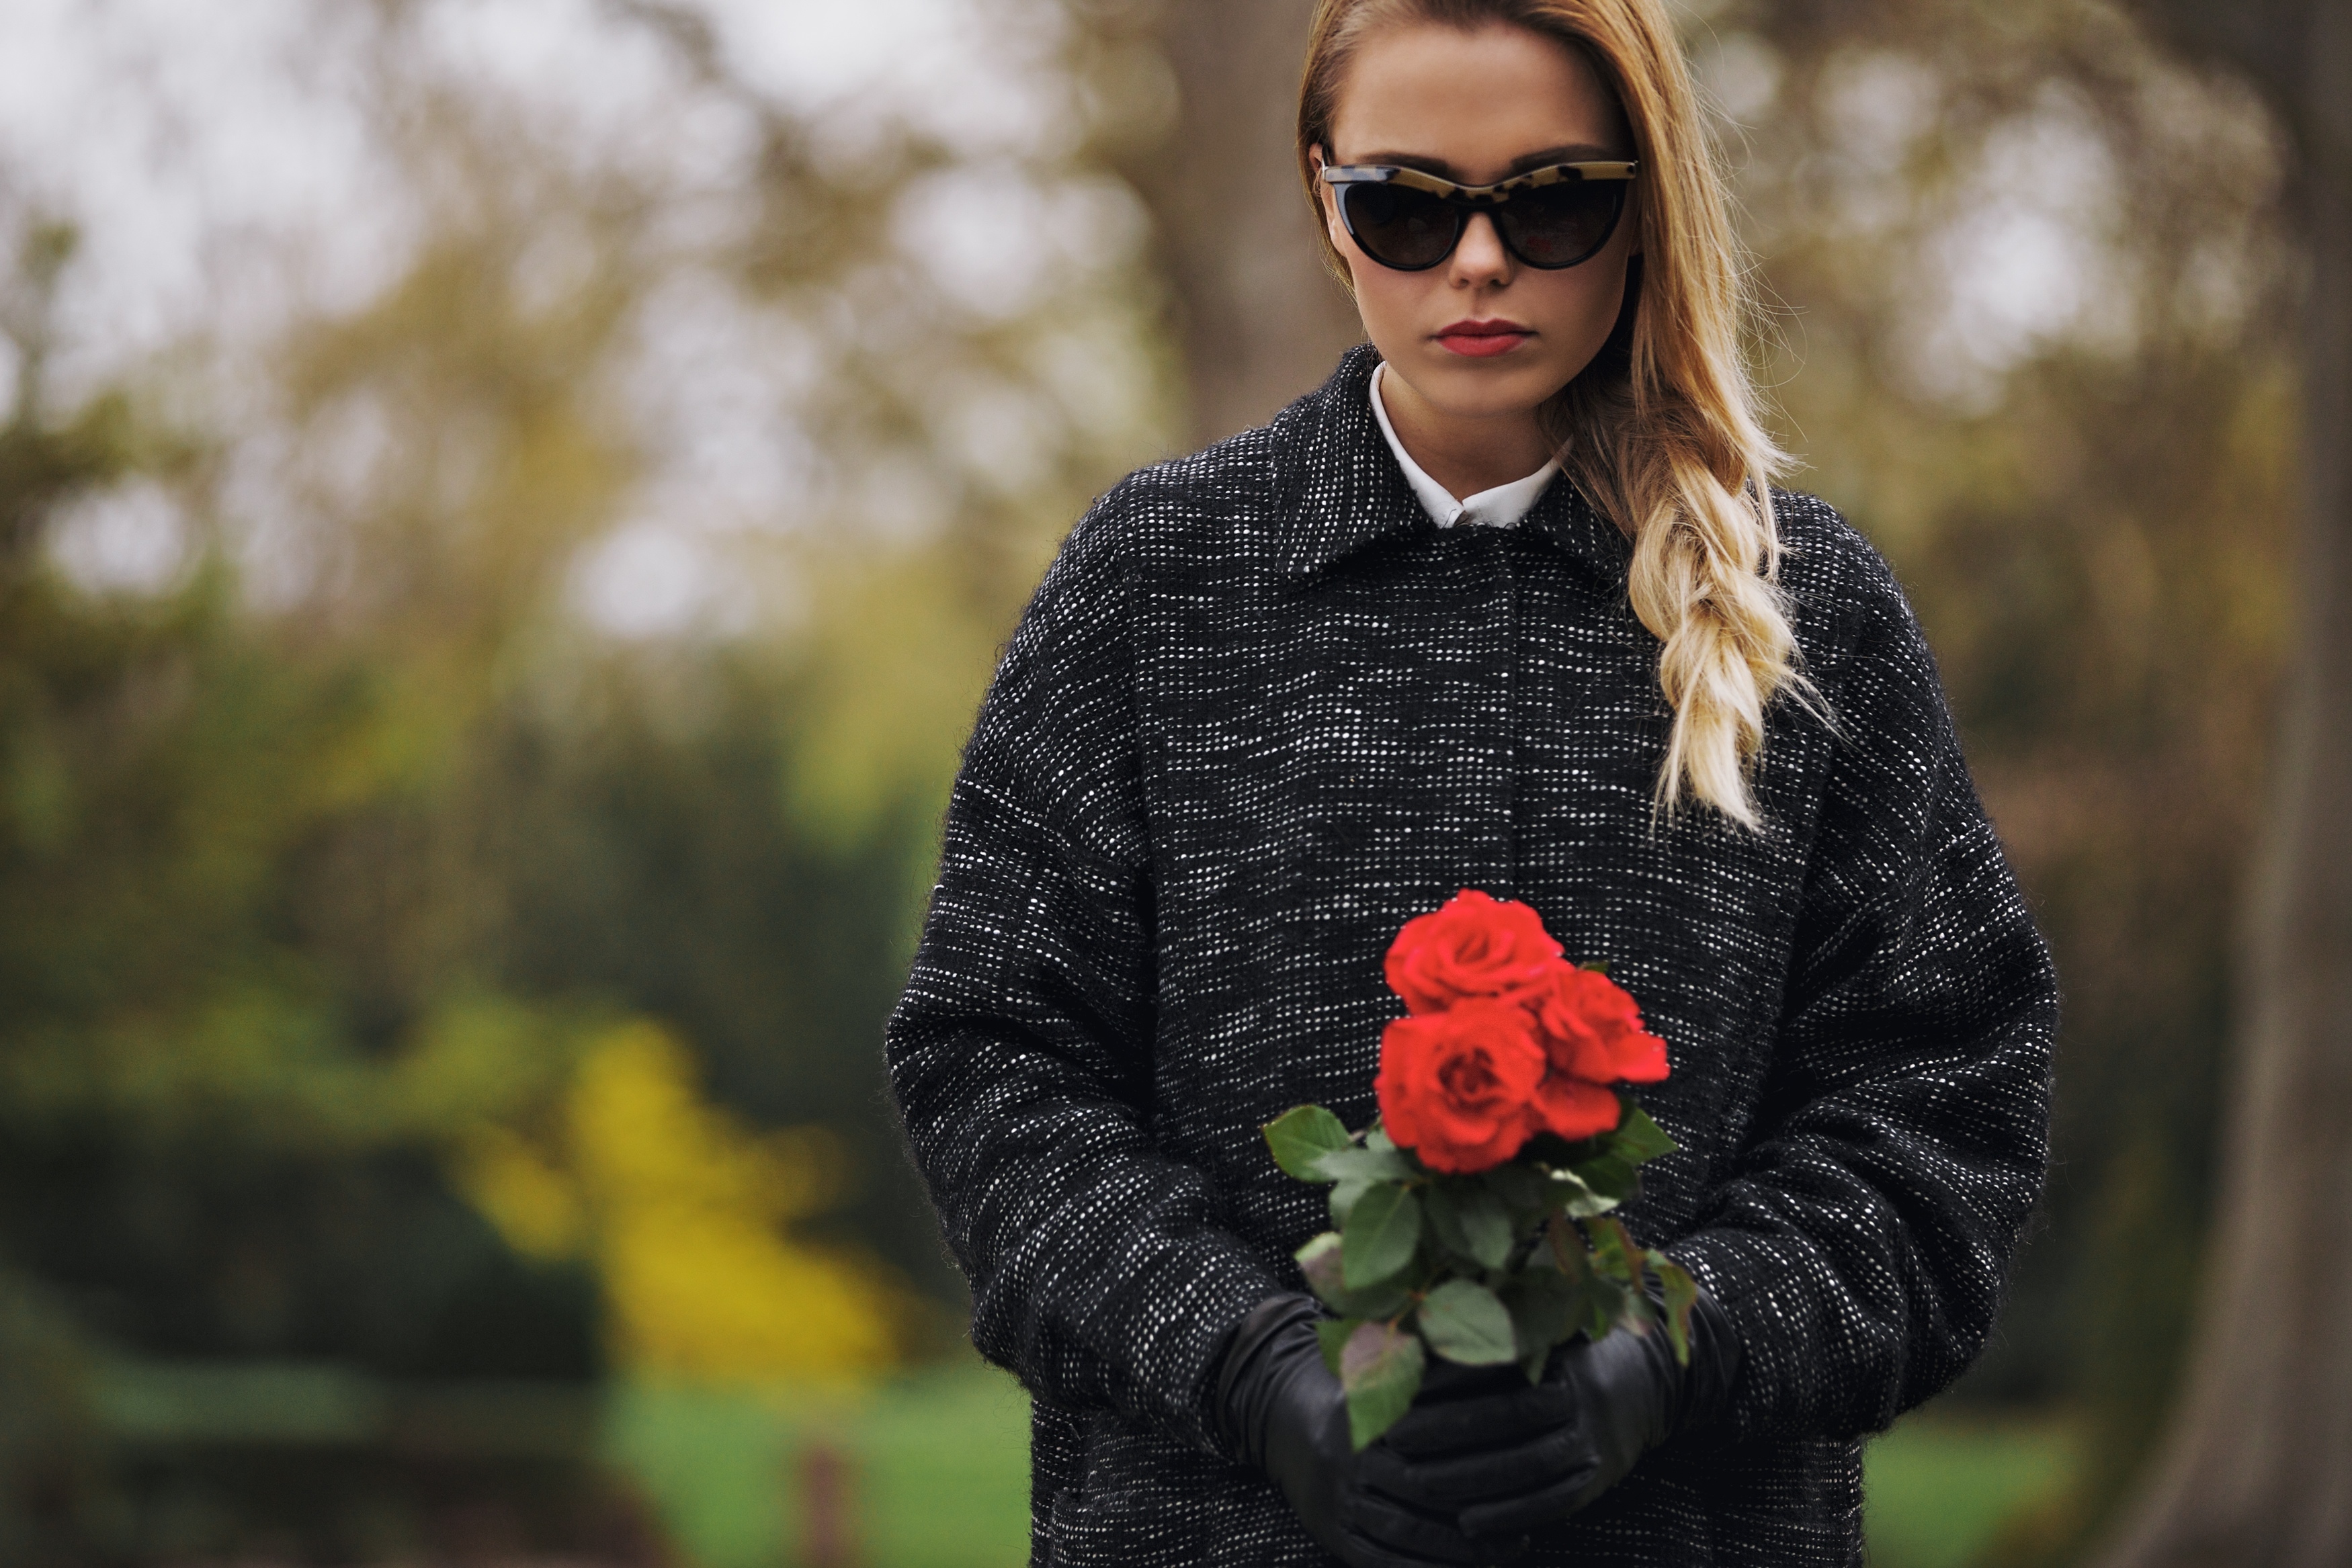 Portrait of young woman in black dress at graveyard holding fresh flowers. | Source: Shutterstock